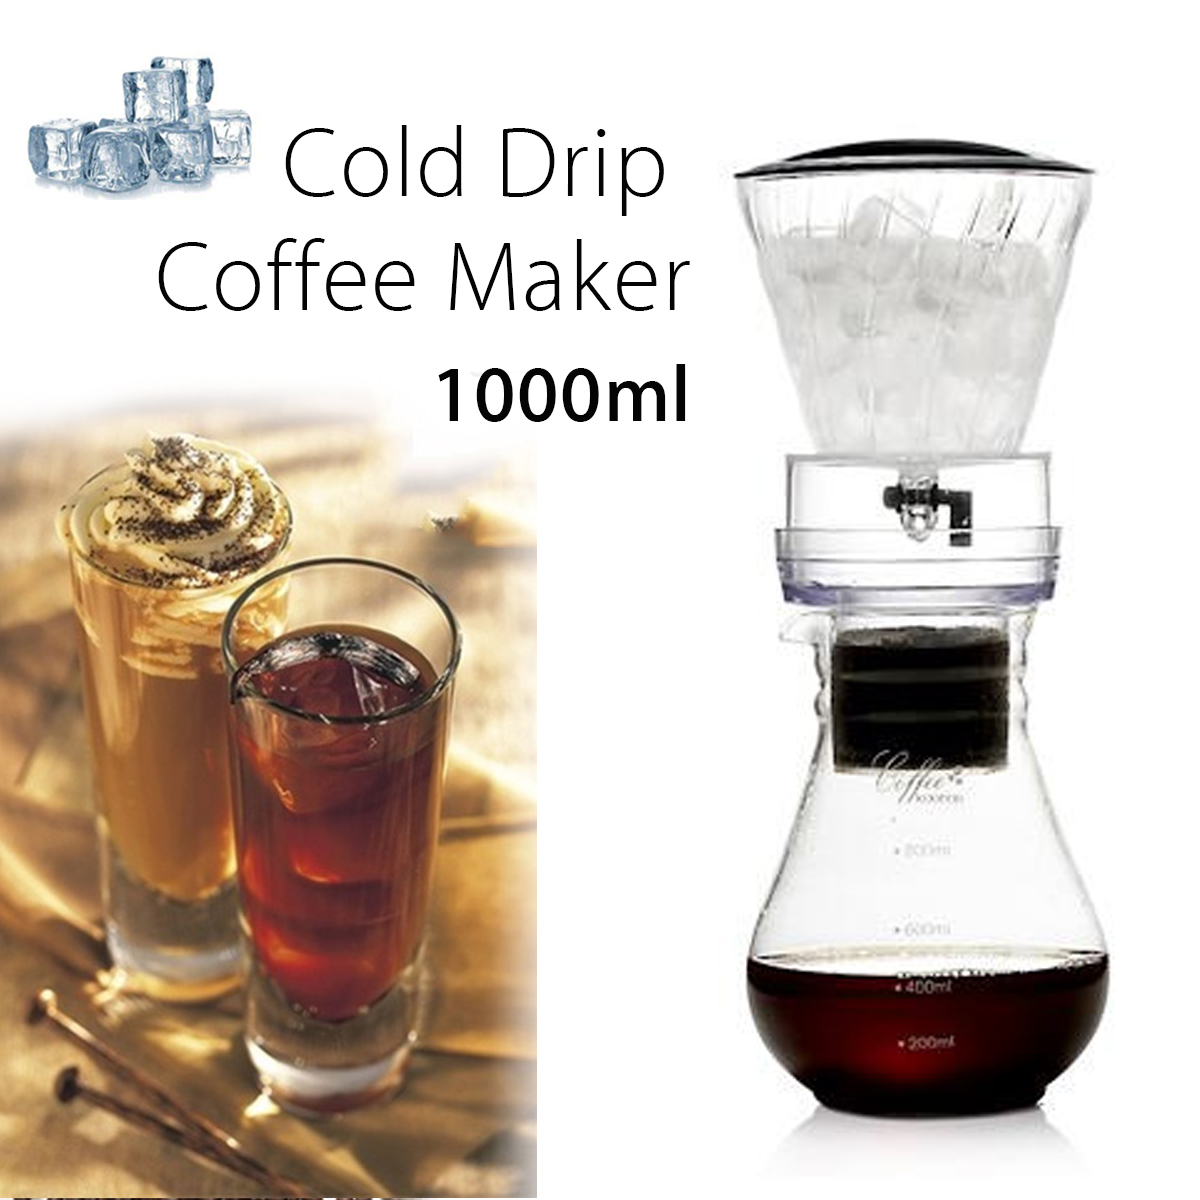 1000mL-Glass-Cold-Iced-Drip-Brew-Home-Coffee-Maker-Pot-Pour-Over-Coffee-Maker-Coffee-Machine-1315102-1